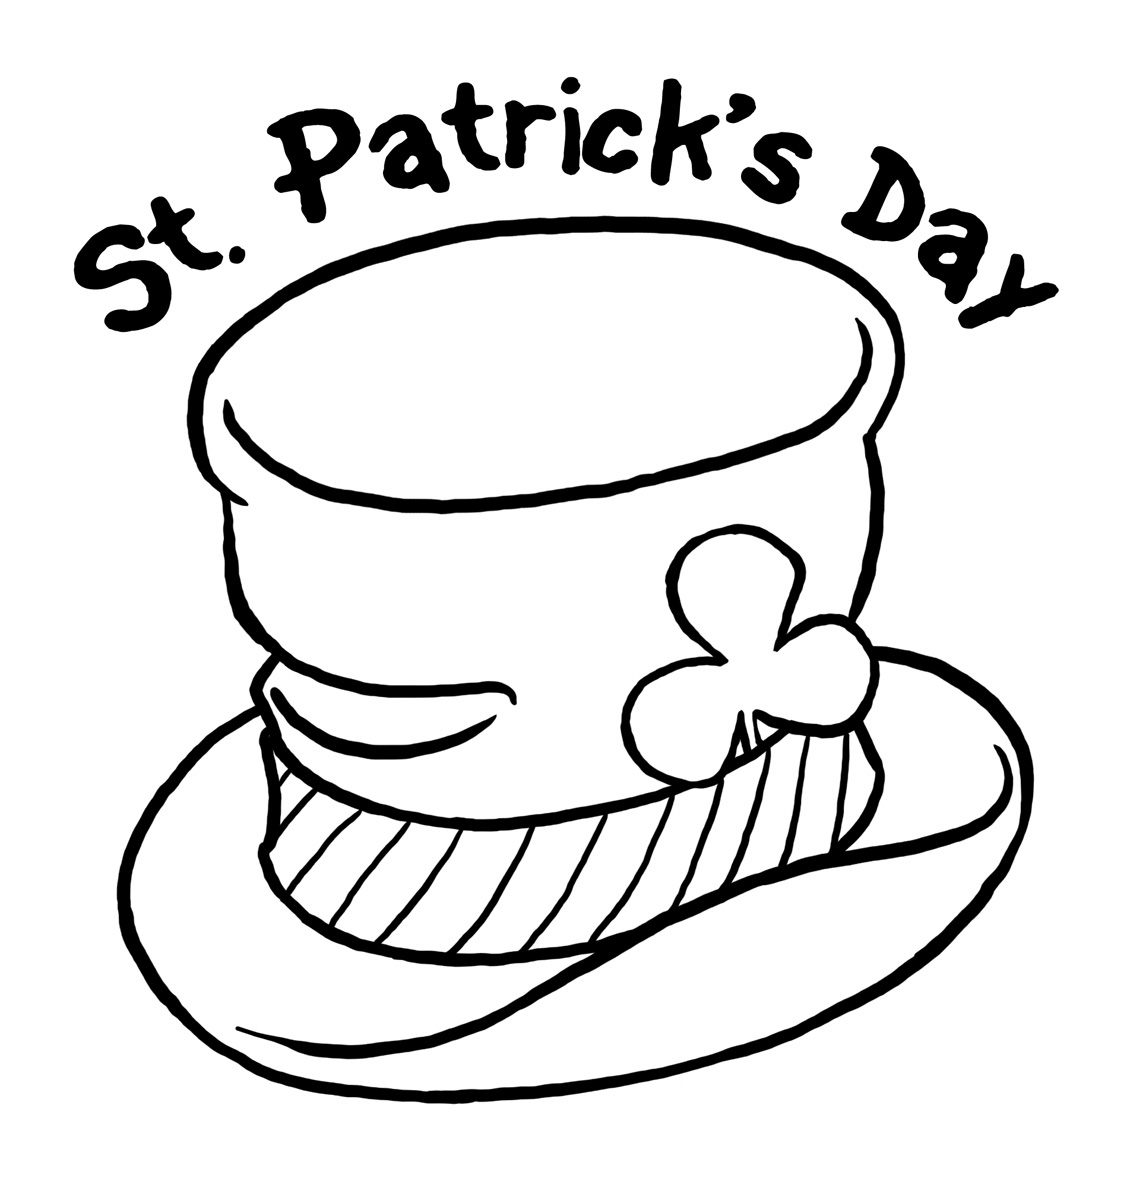 Printable st Patricks Day Coloring PagesTaiwanhydrogen.org | Free ...